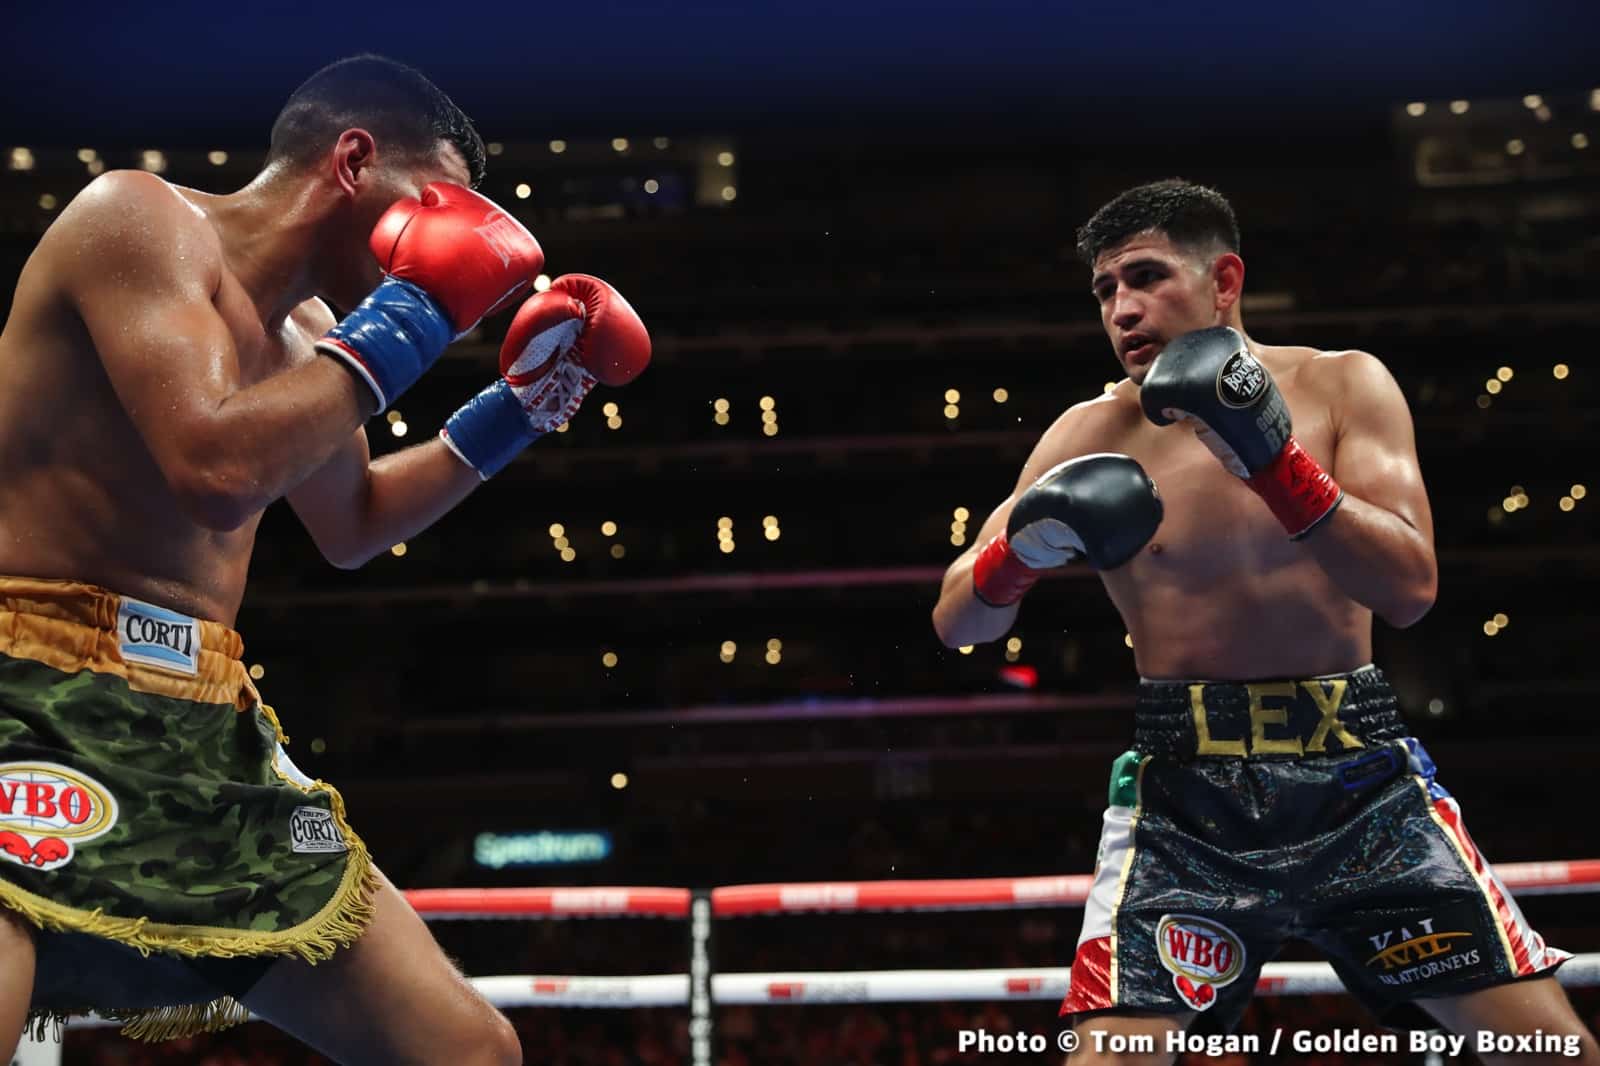 Photos: King Ryan Knocks Out Fortuna In Round 6